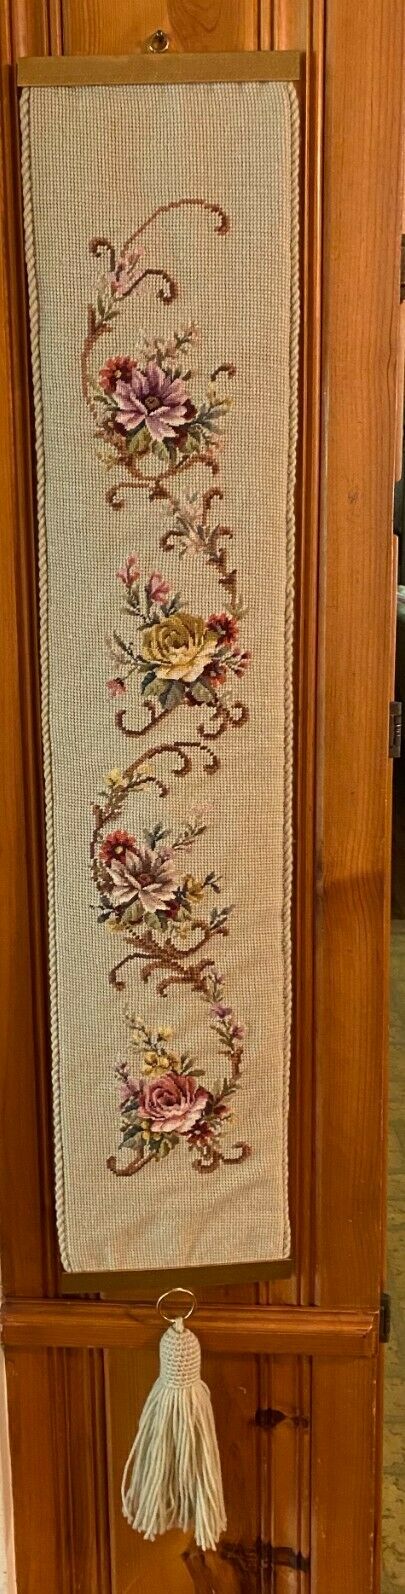 Vintage Needlepoint Floral Tapestry with Ornate Scroll Design Bell Pull